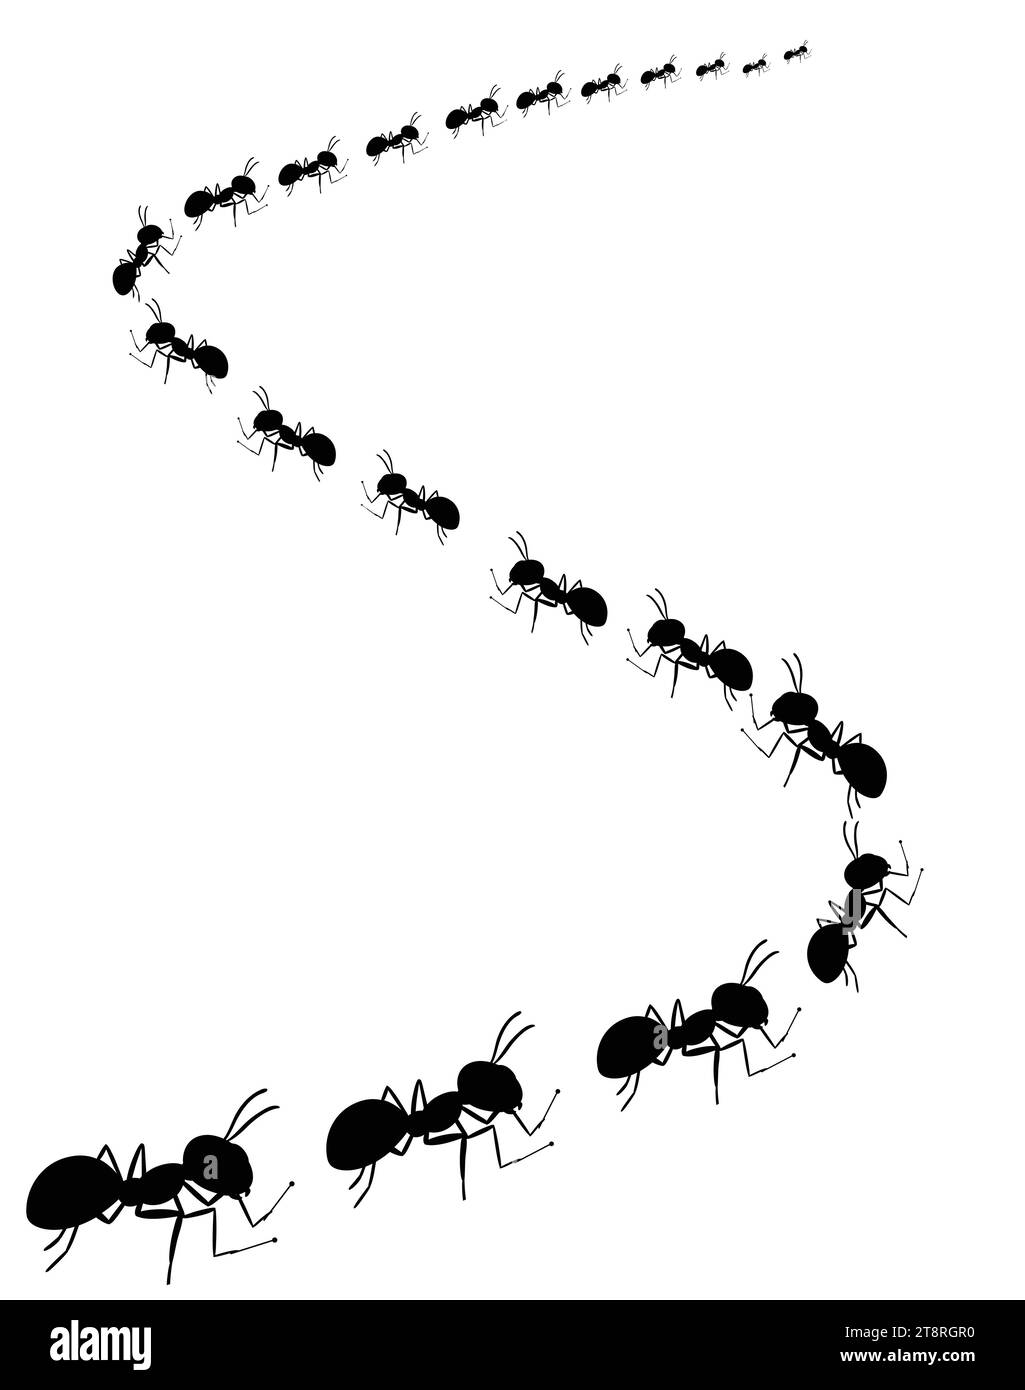 A line of worker ants marching in search of food. Vector illustration Stock Vector